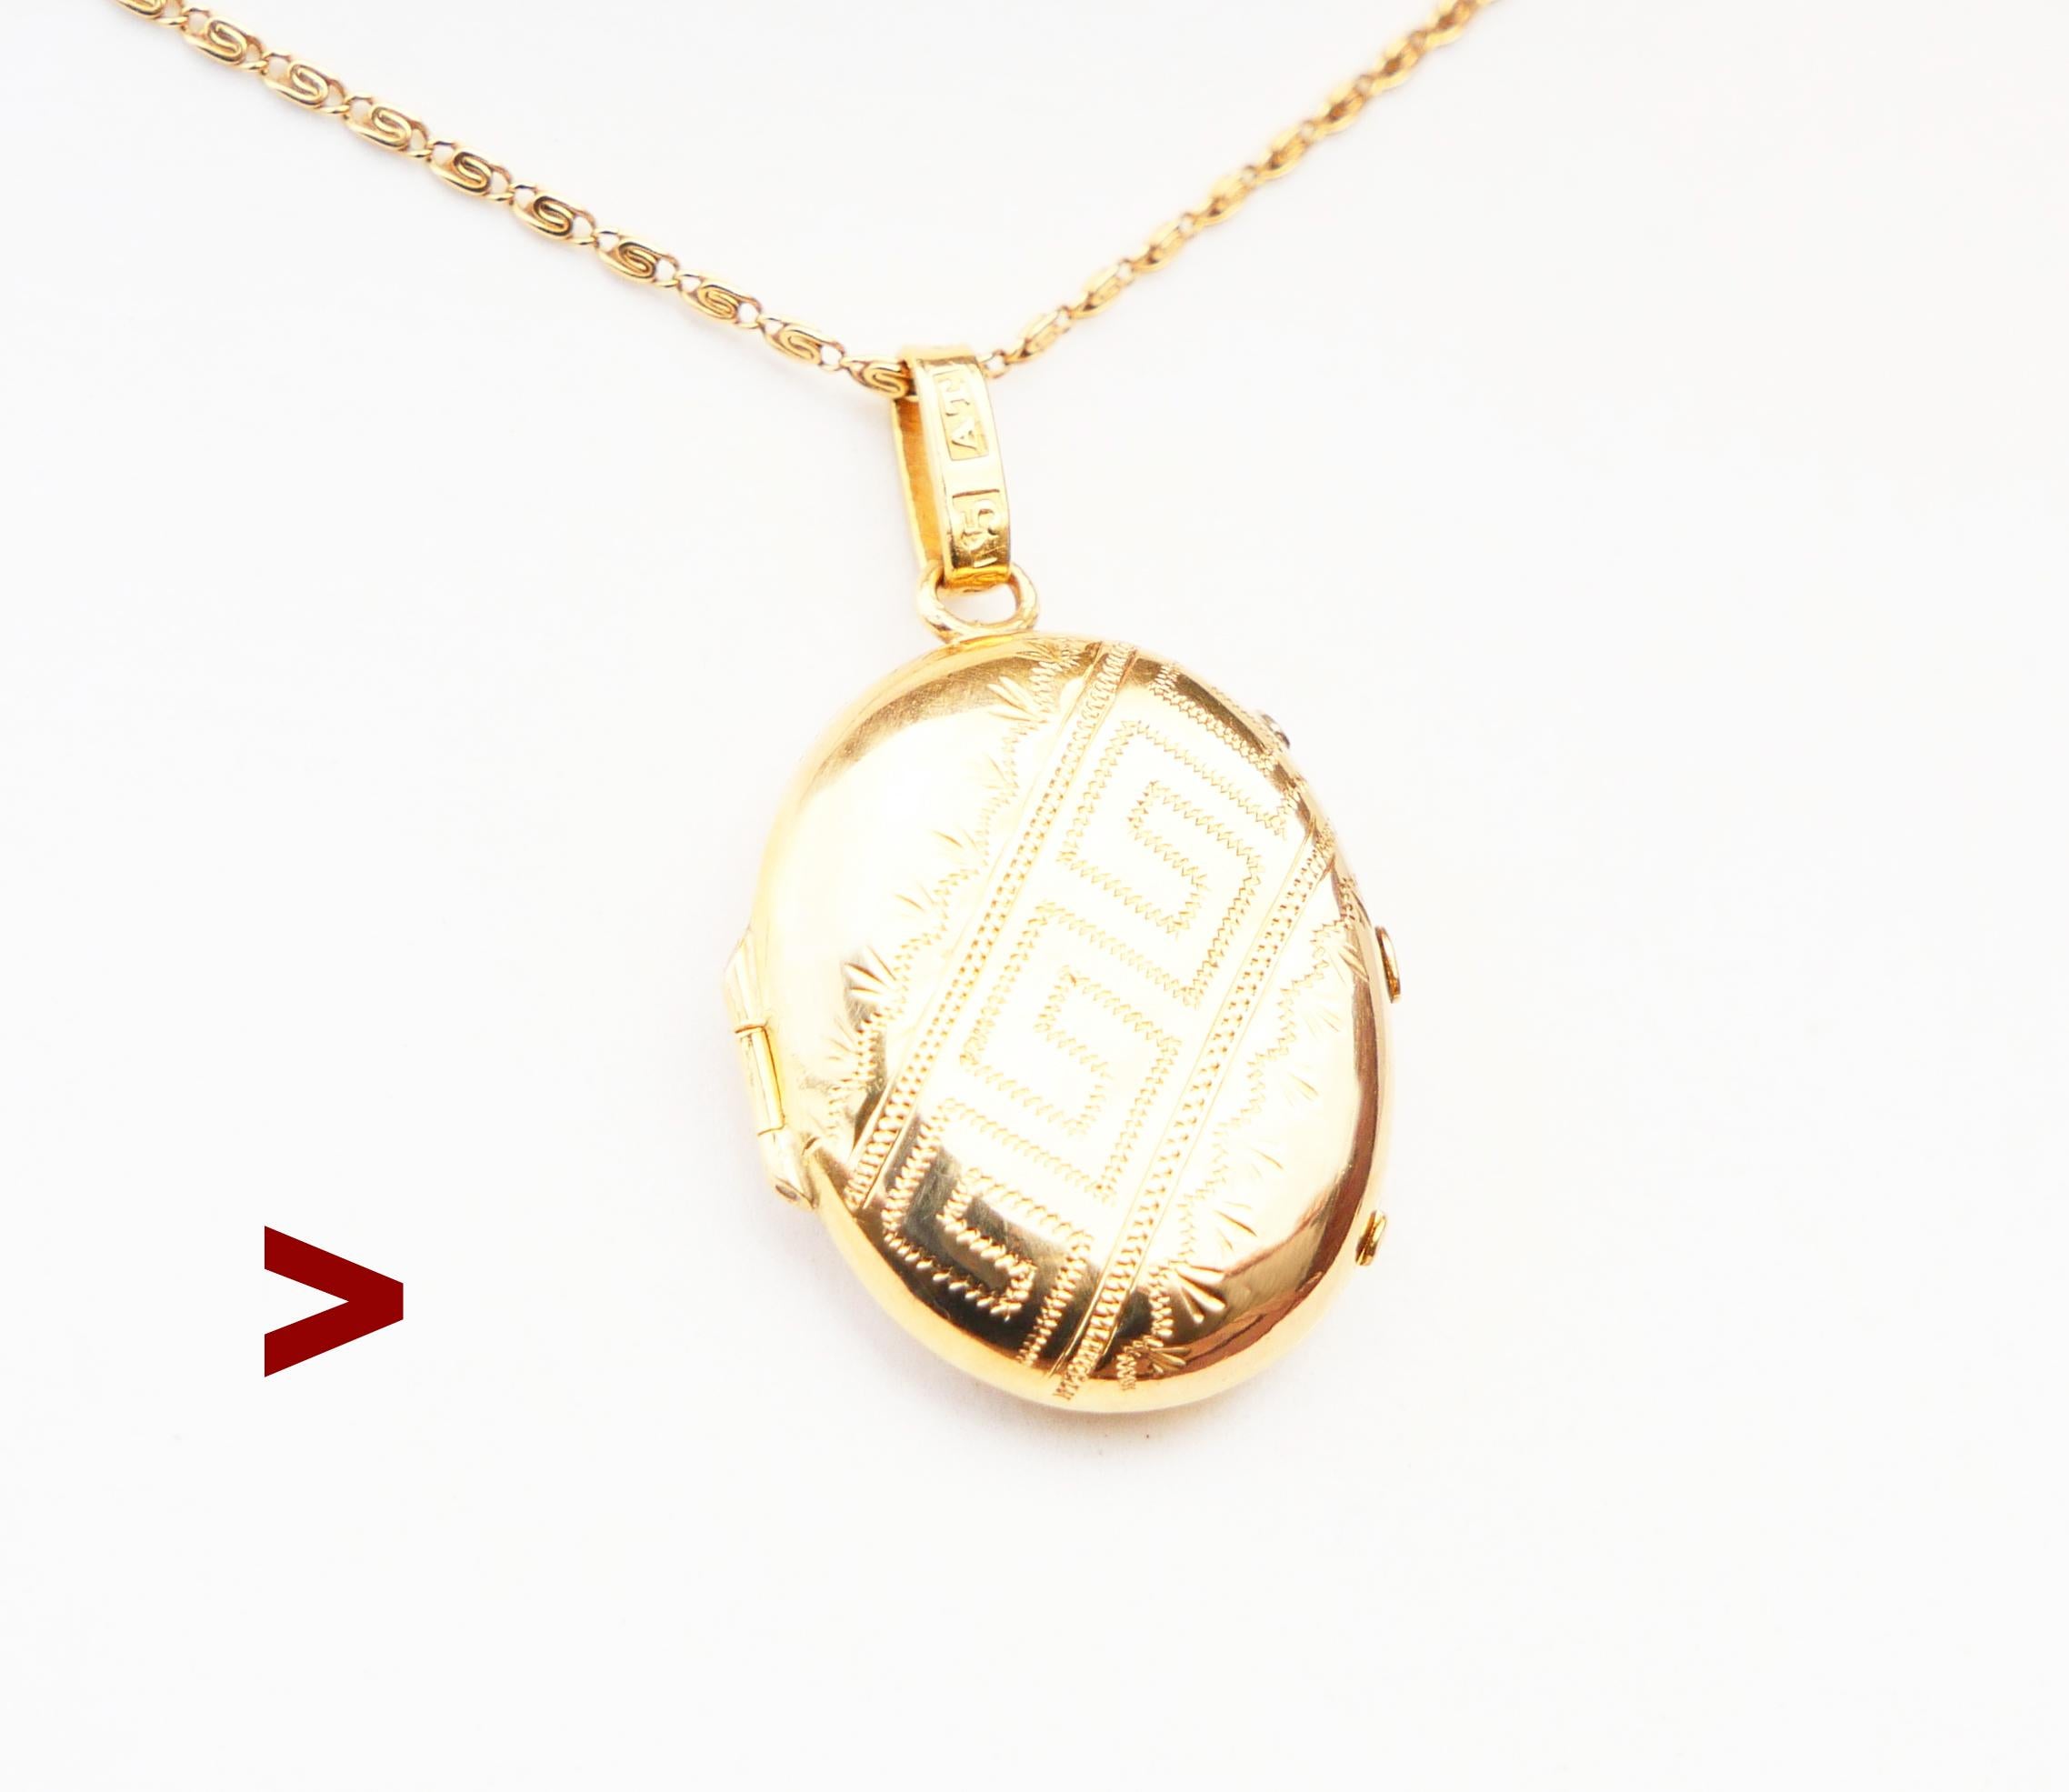 Hand-made in 18K Gold - Pendant / Locket with hand-engraved ornaments of Greek Key on both sides. Made in solid 18K Yellow Gold. One internal removable bezel inside, no glass. All parts tested 18K Yellow Gold. Bail with worn Swedish XIX cent